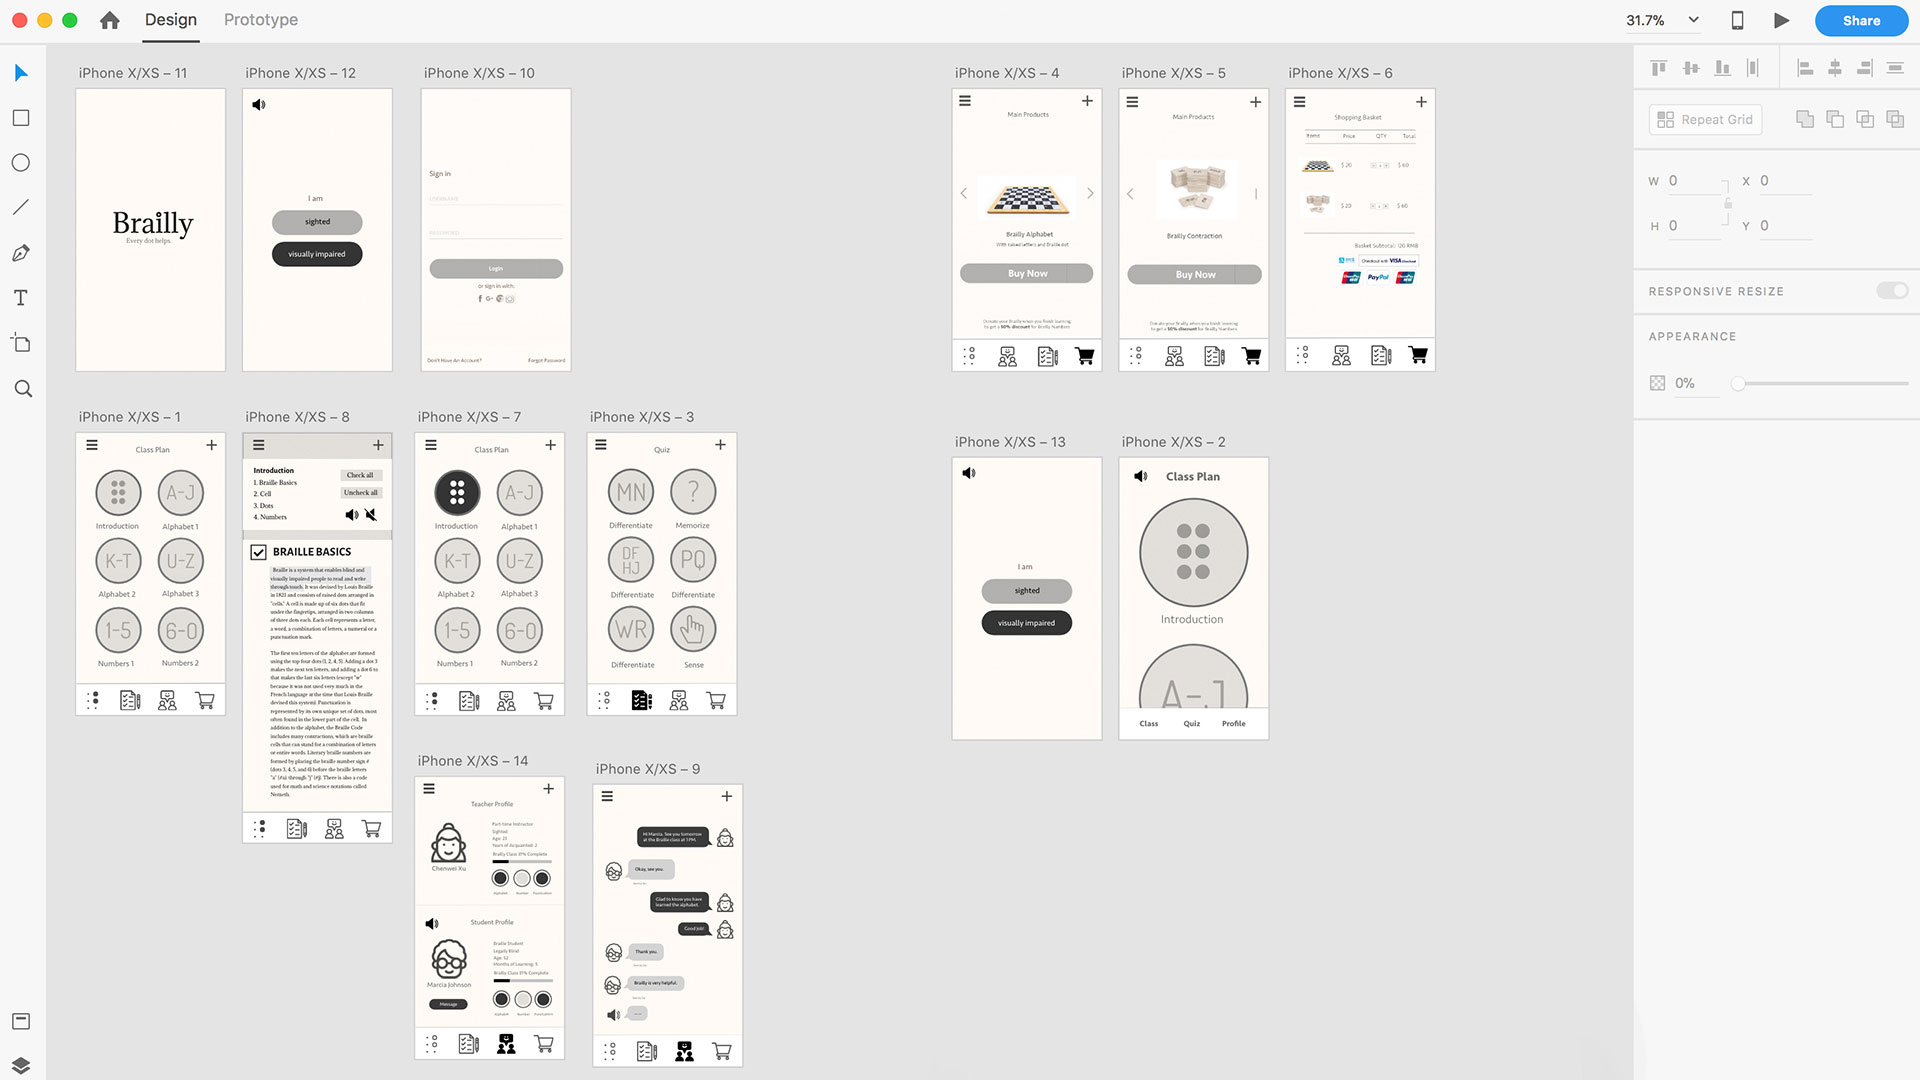 Brailly mobile app user interface design